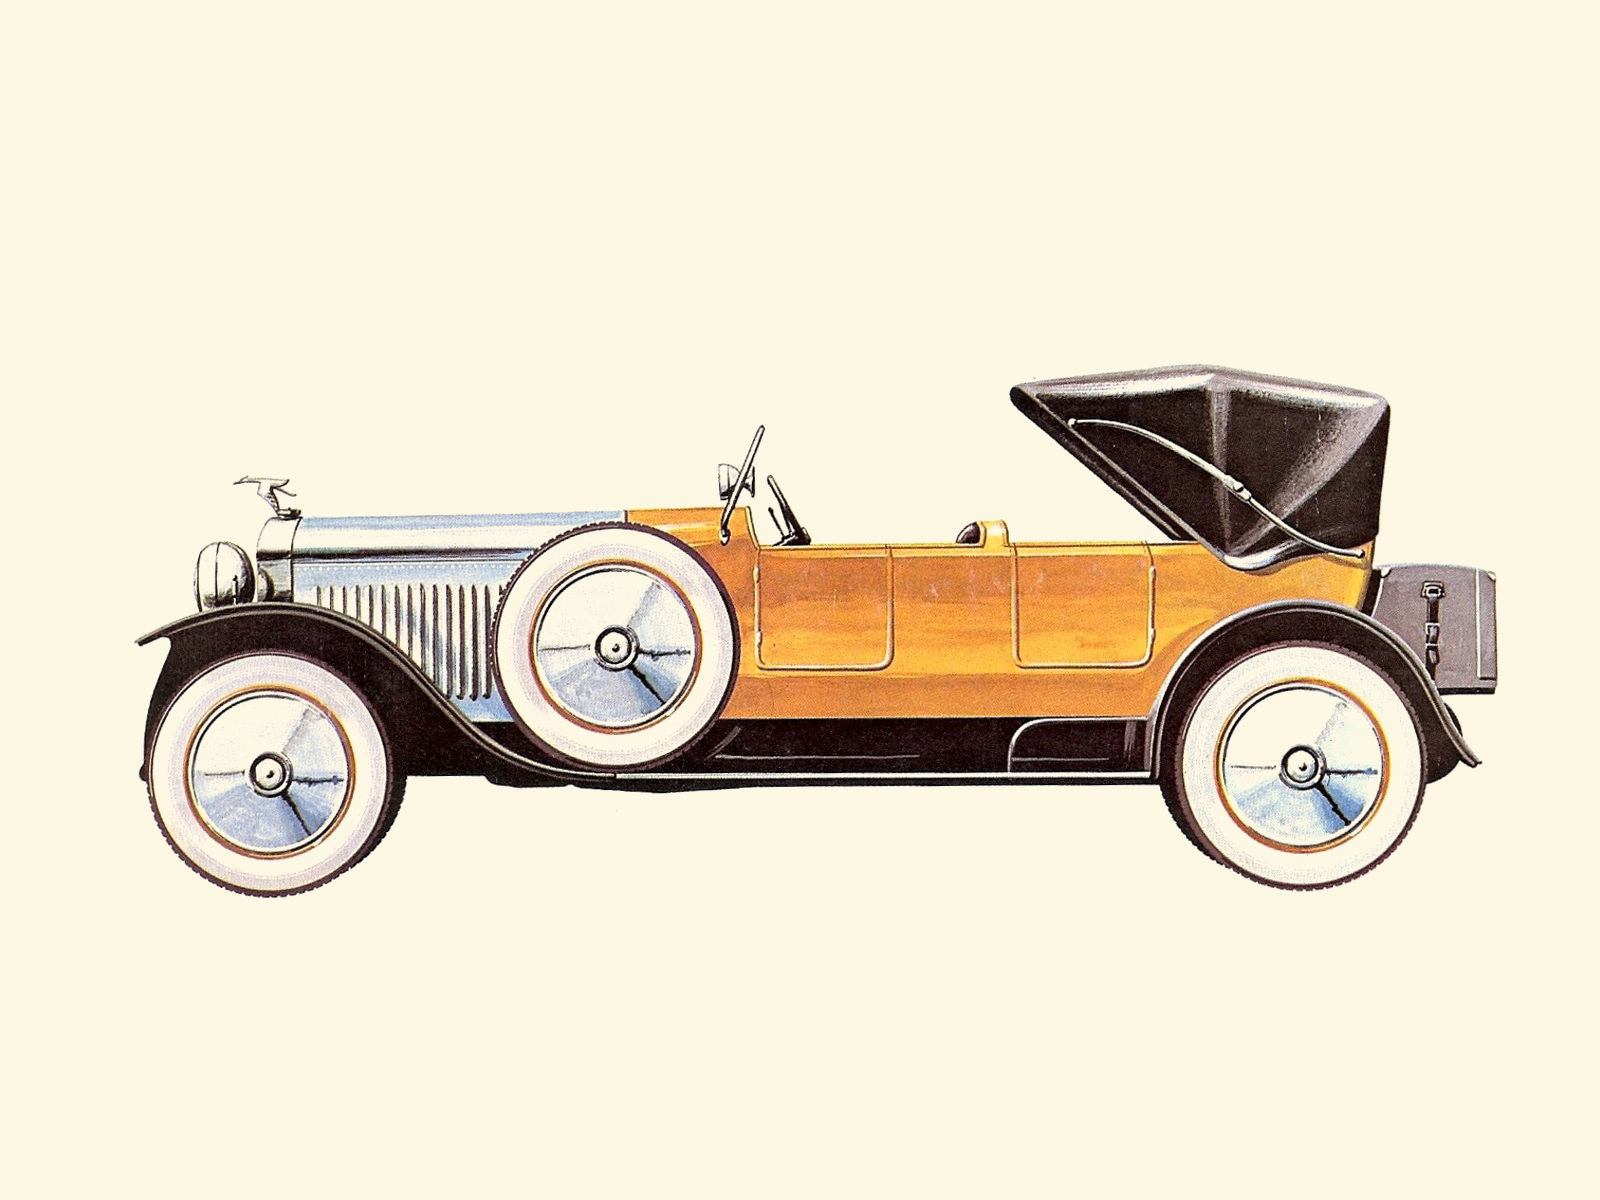 1924 Hispano-Suiza 32 CV - Illustrated by Pierre Dumont